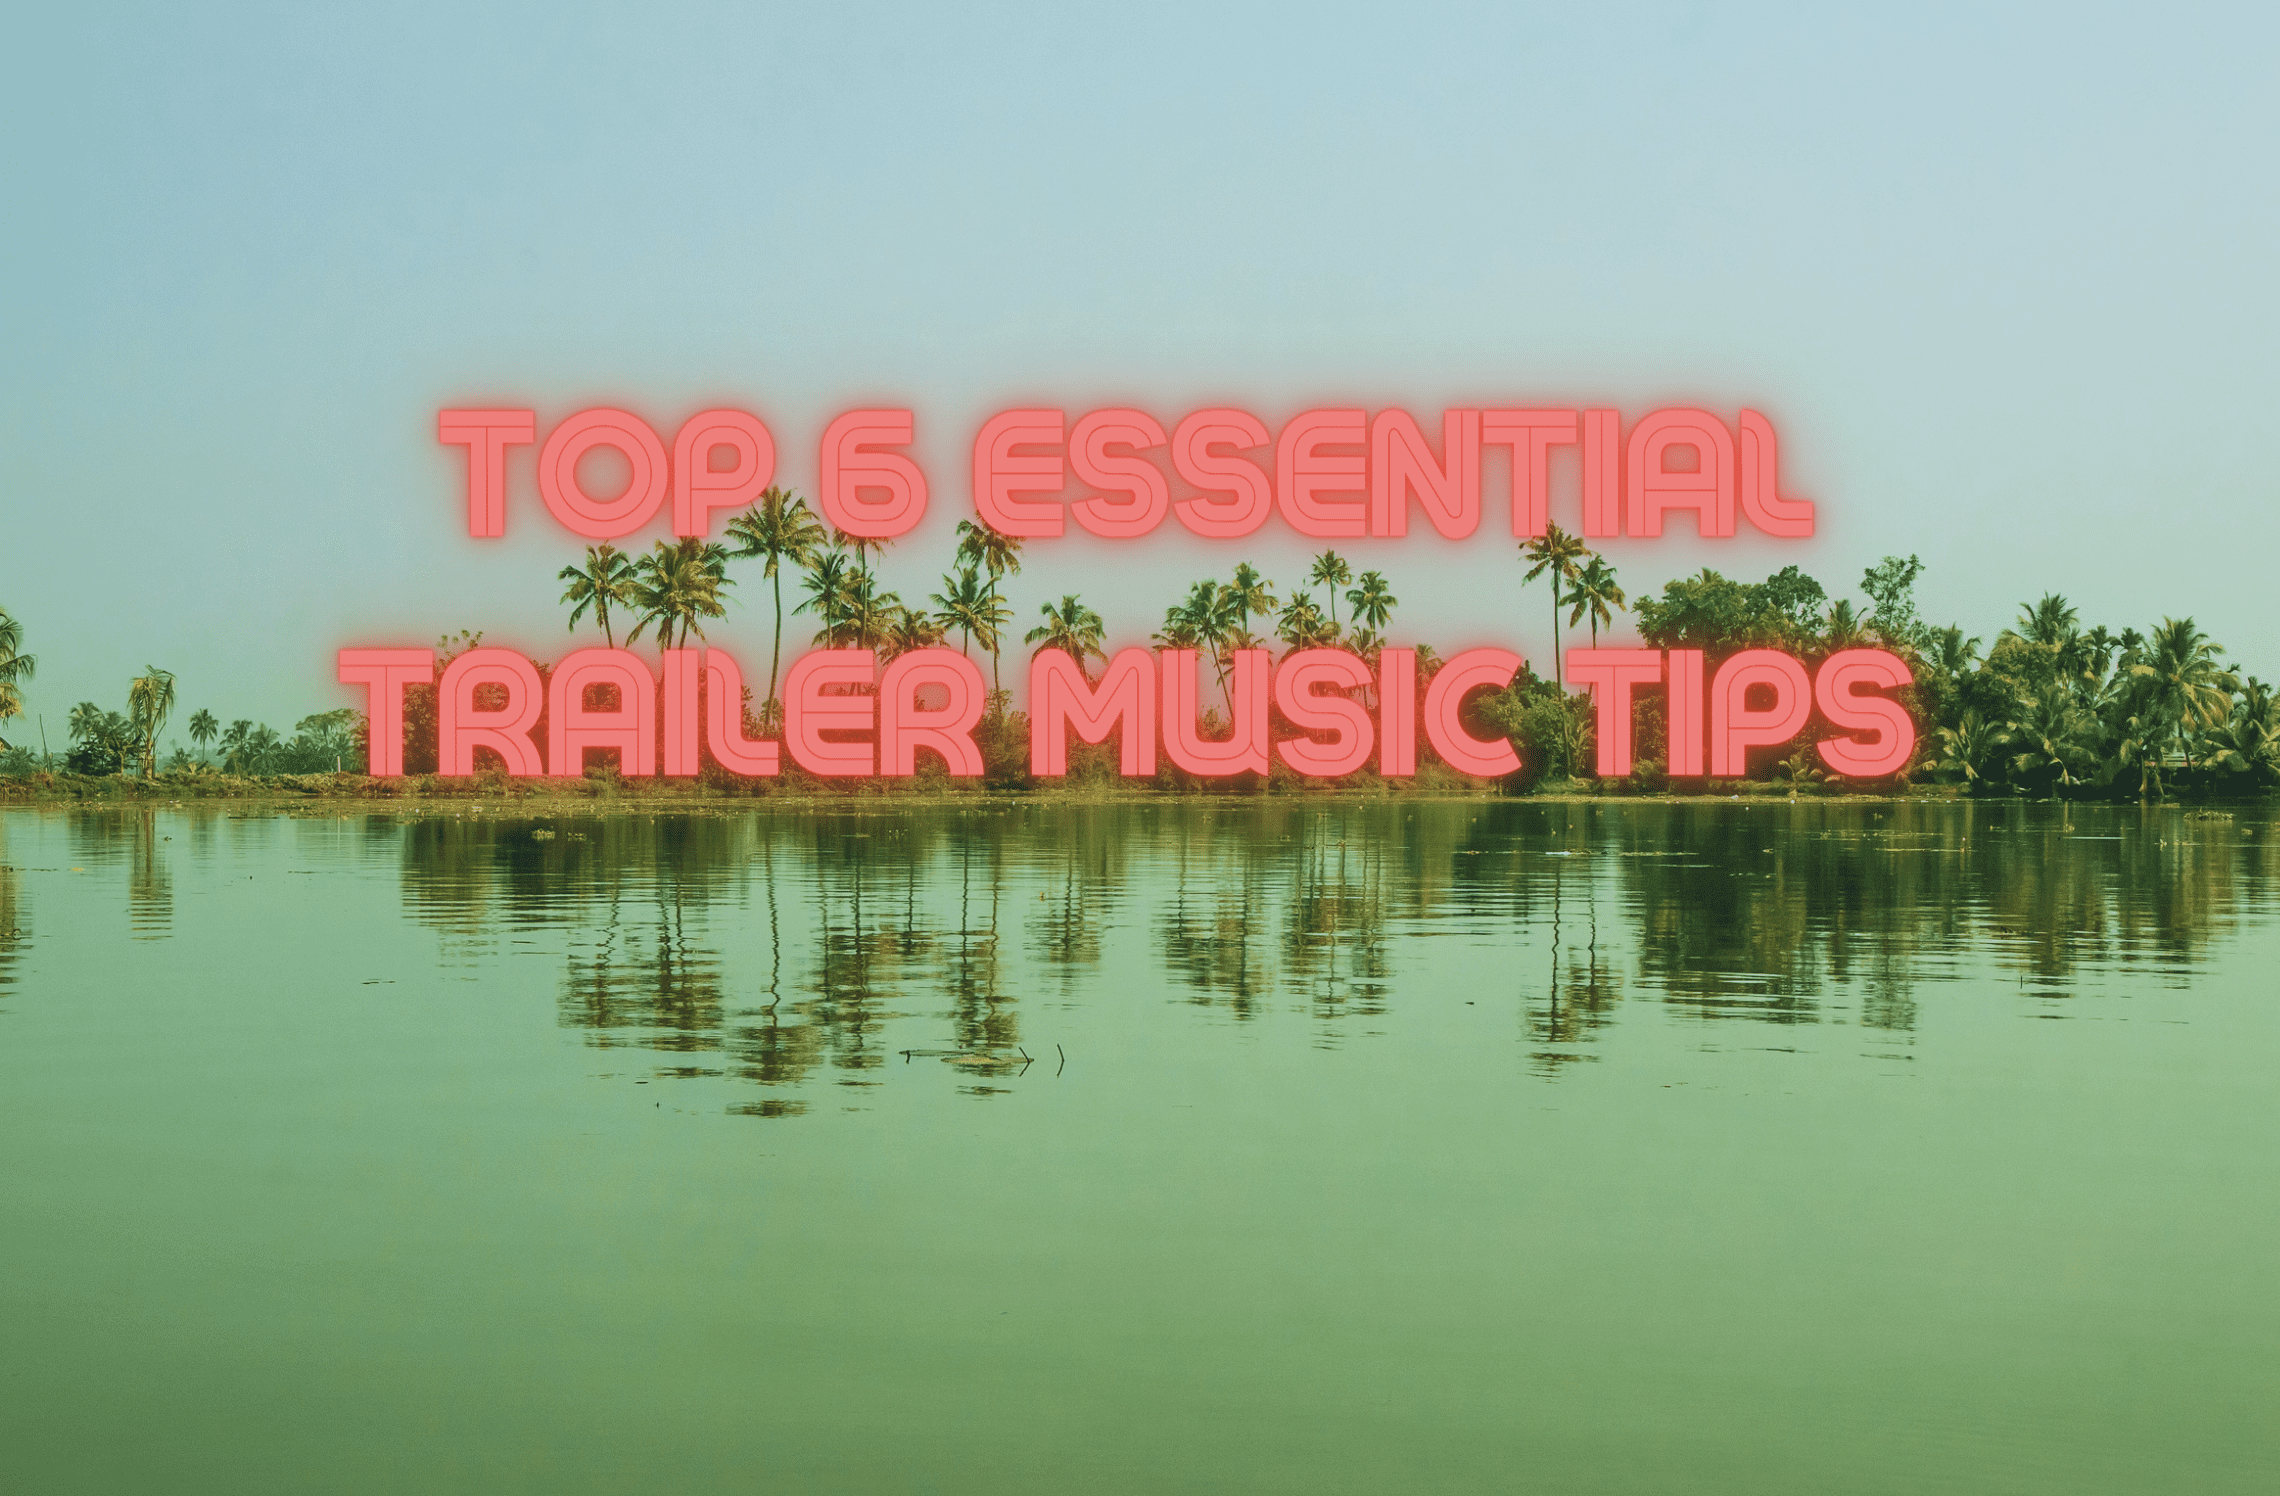 Top 6 Essential Trailer Music Tips Main Image red